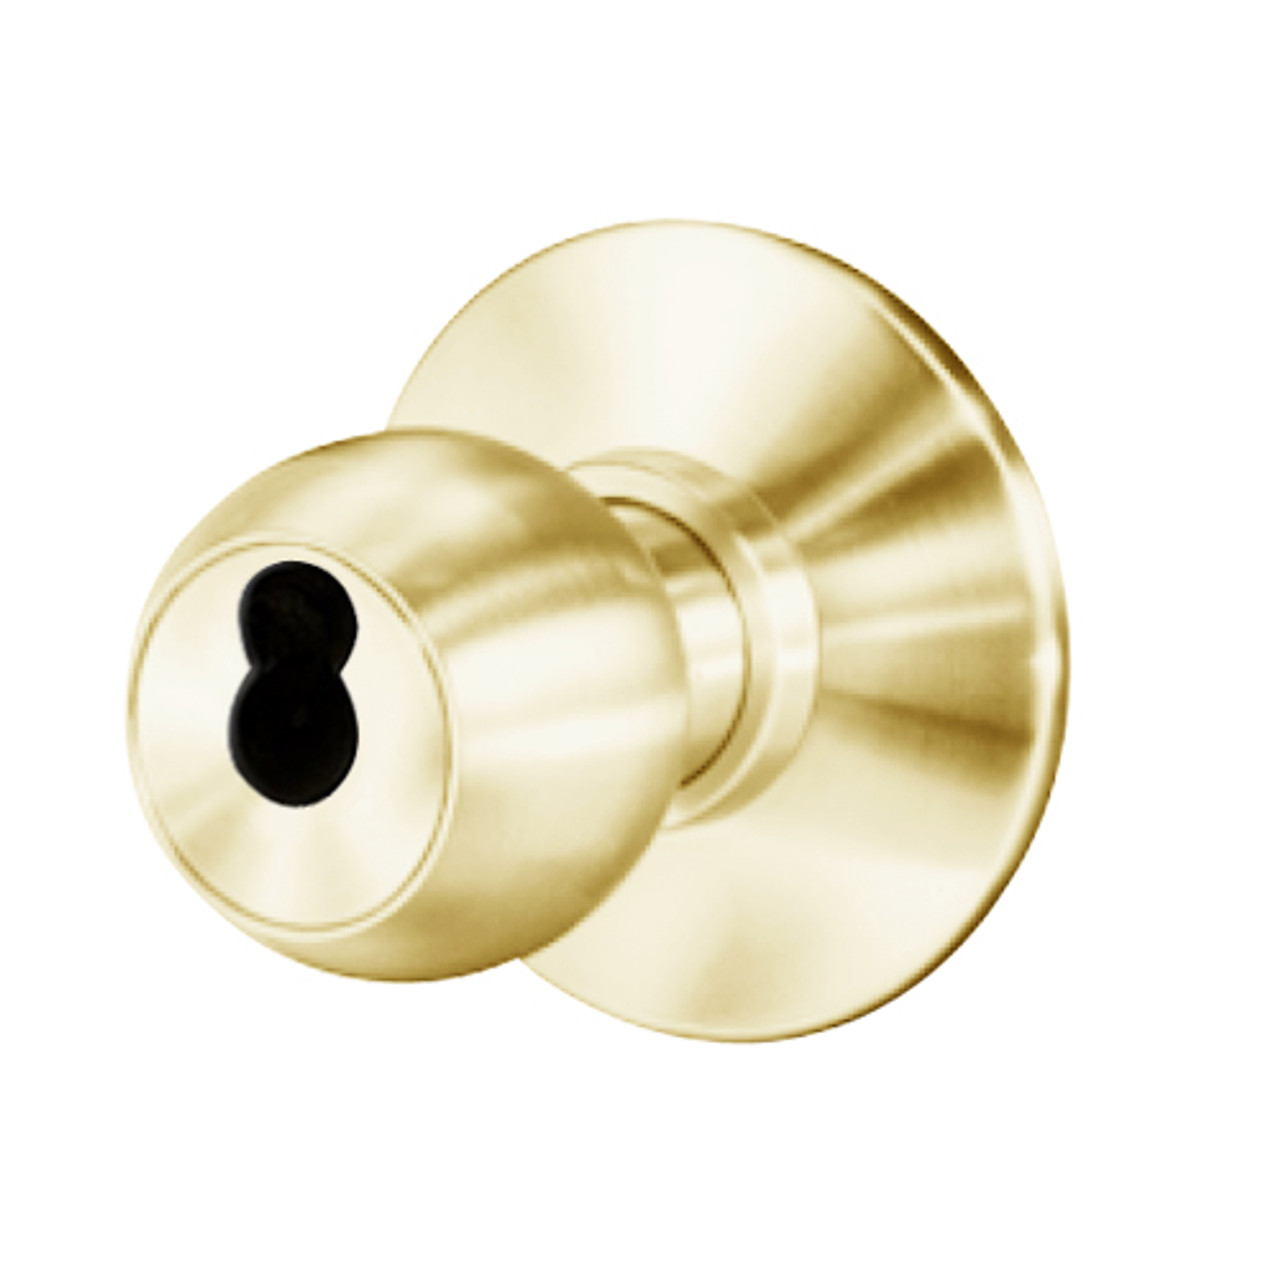 8K57S4DS3605 Best 8K Series Communicating Heavy Duty Cylindrical Knob Locks with Round Style in Bright Brass